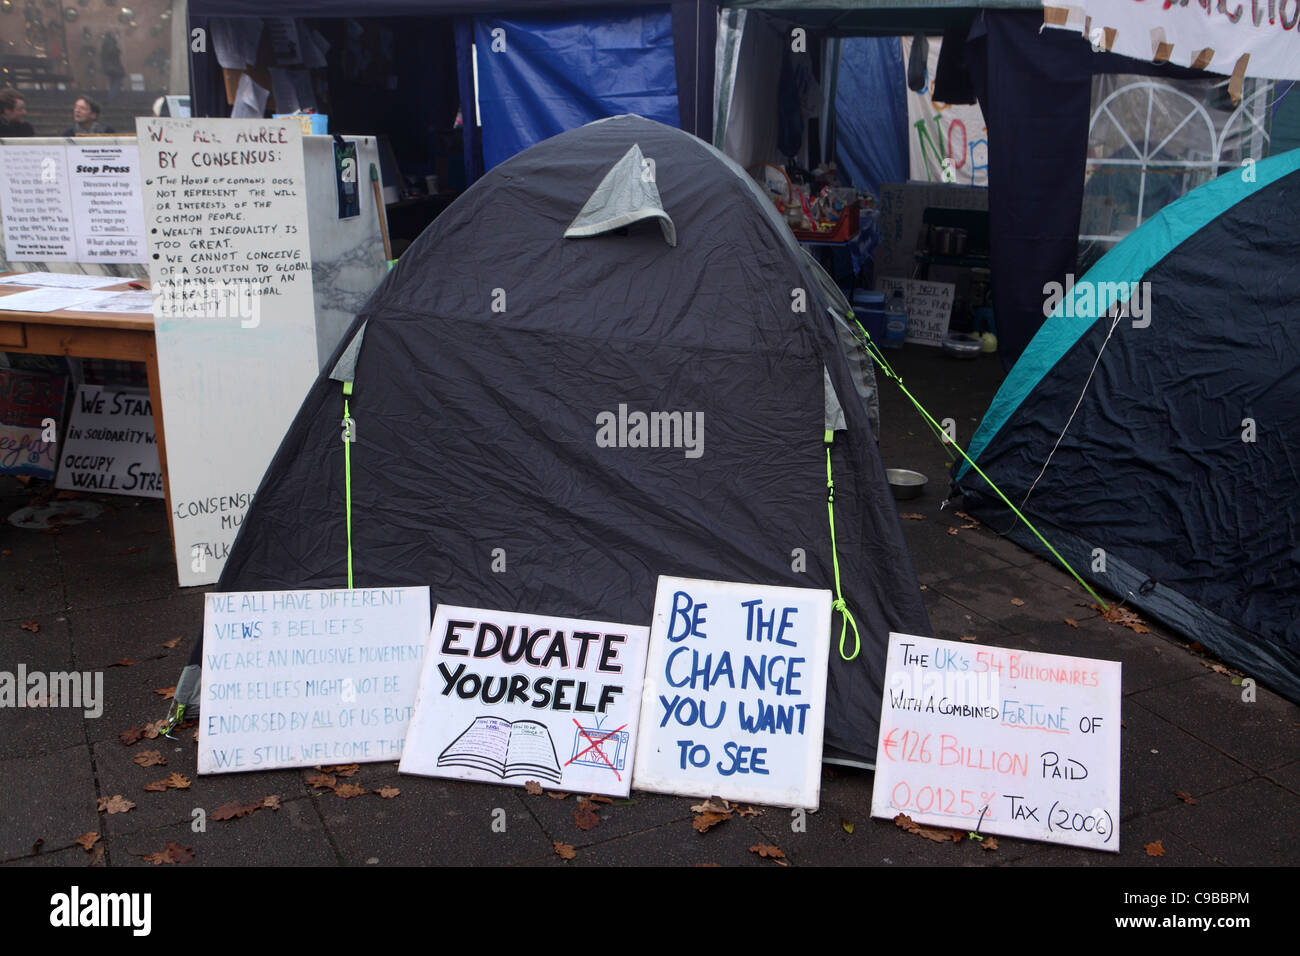 Occupy protest movement encampment in Norwich city center UK Stock Photo